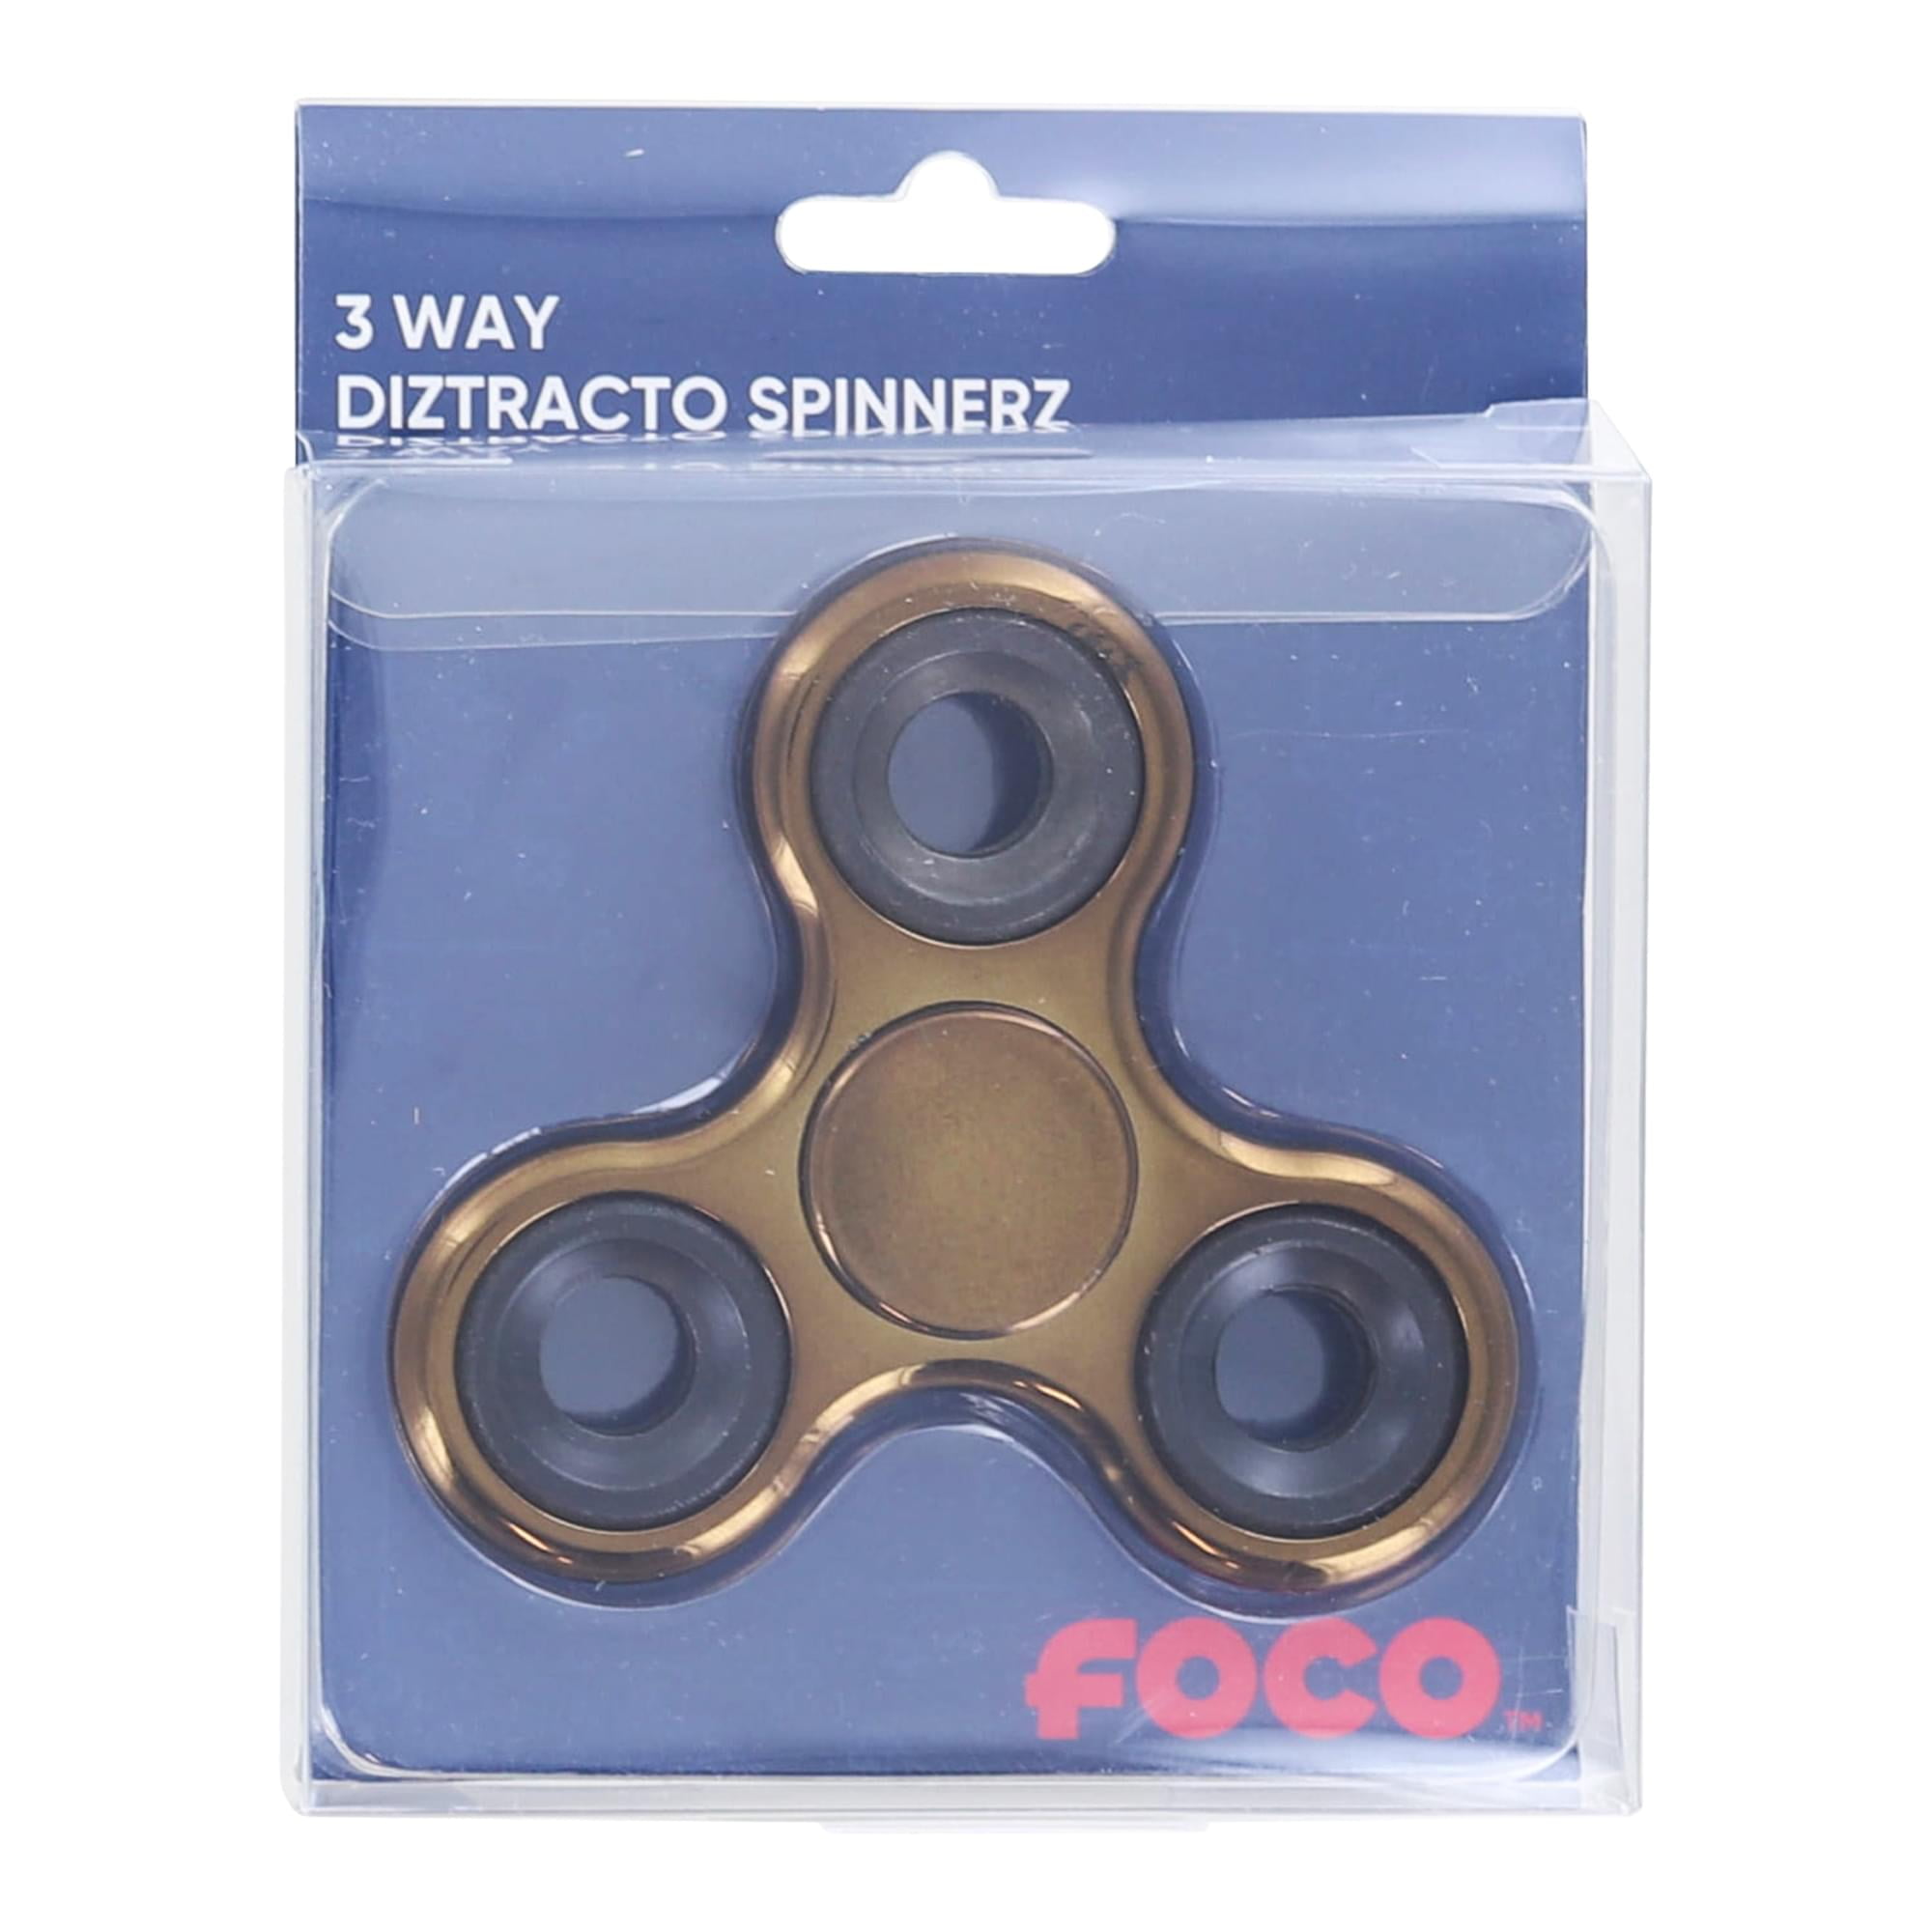 Majestic Sports And Entertainment Metallic Fidget Spinner | Silver